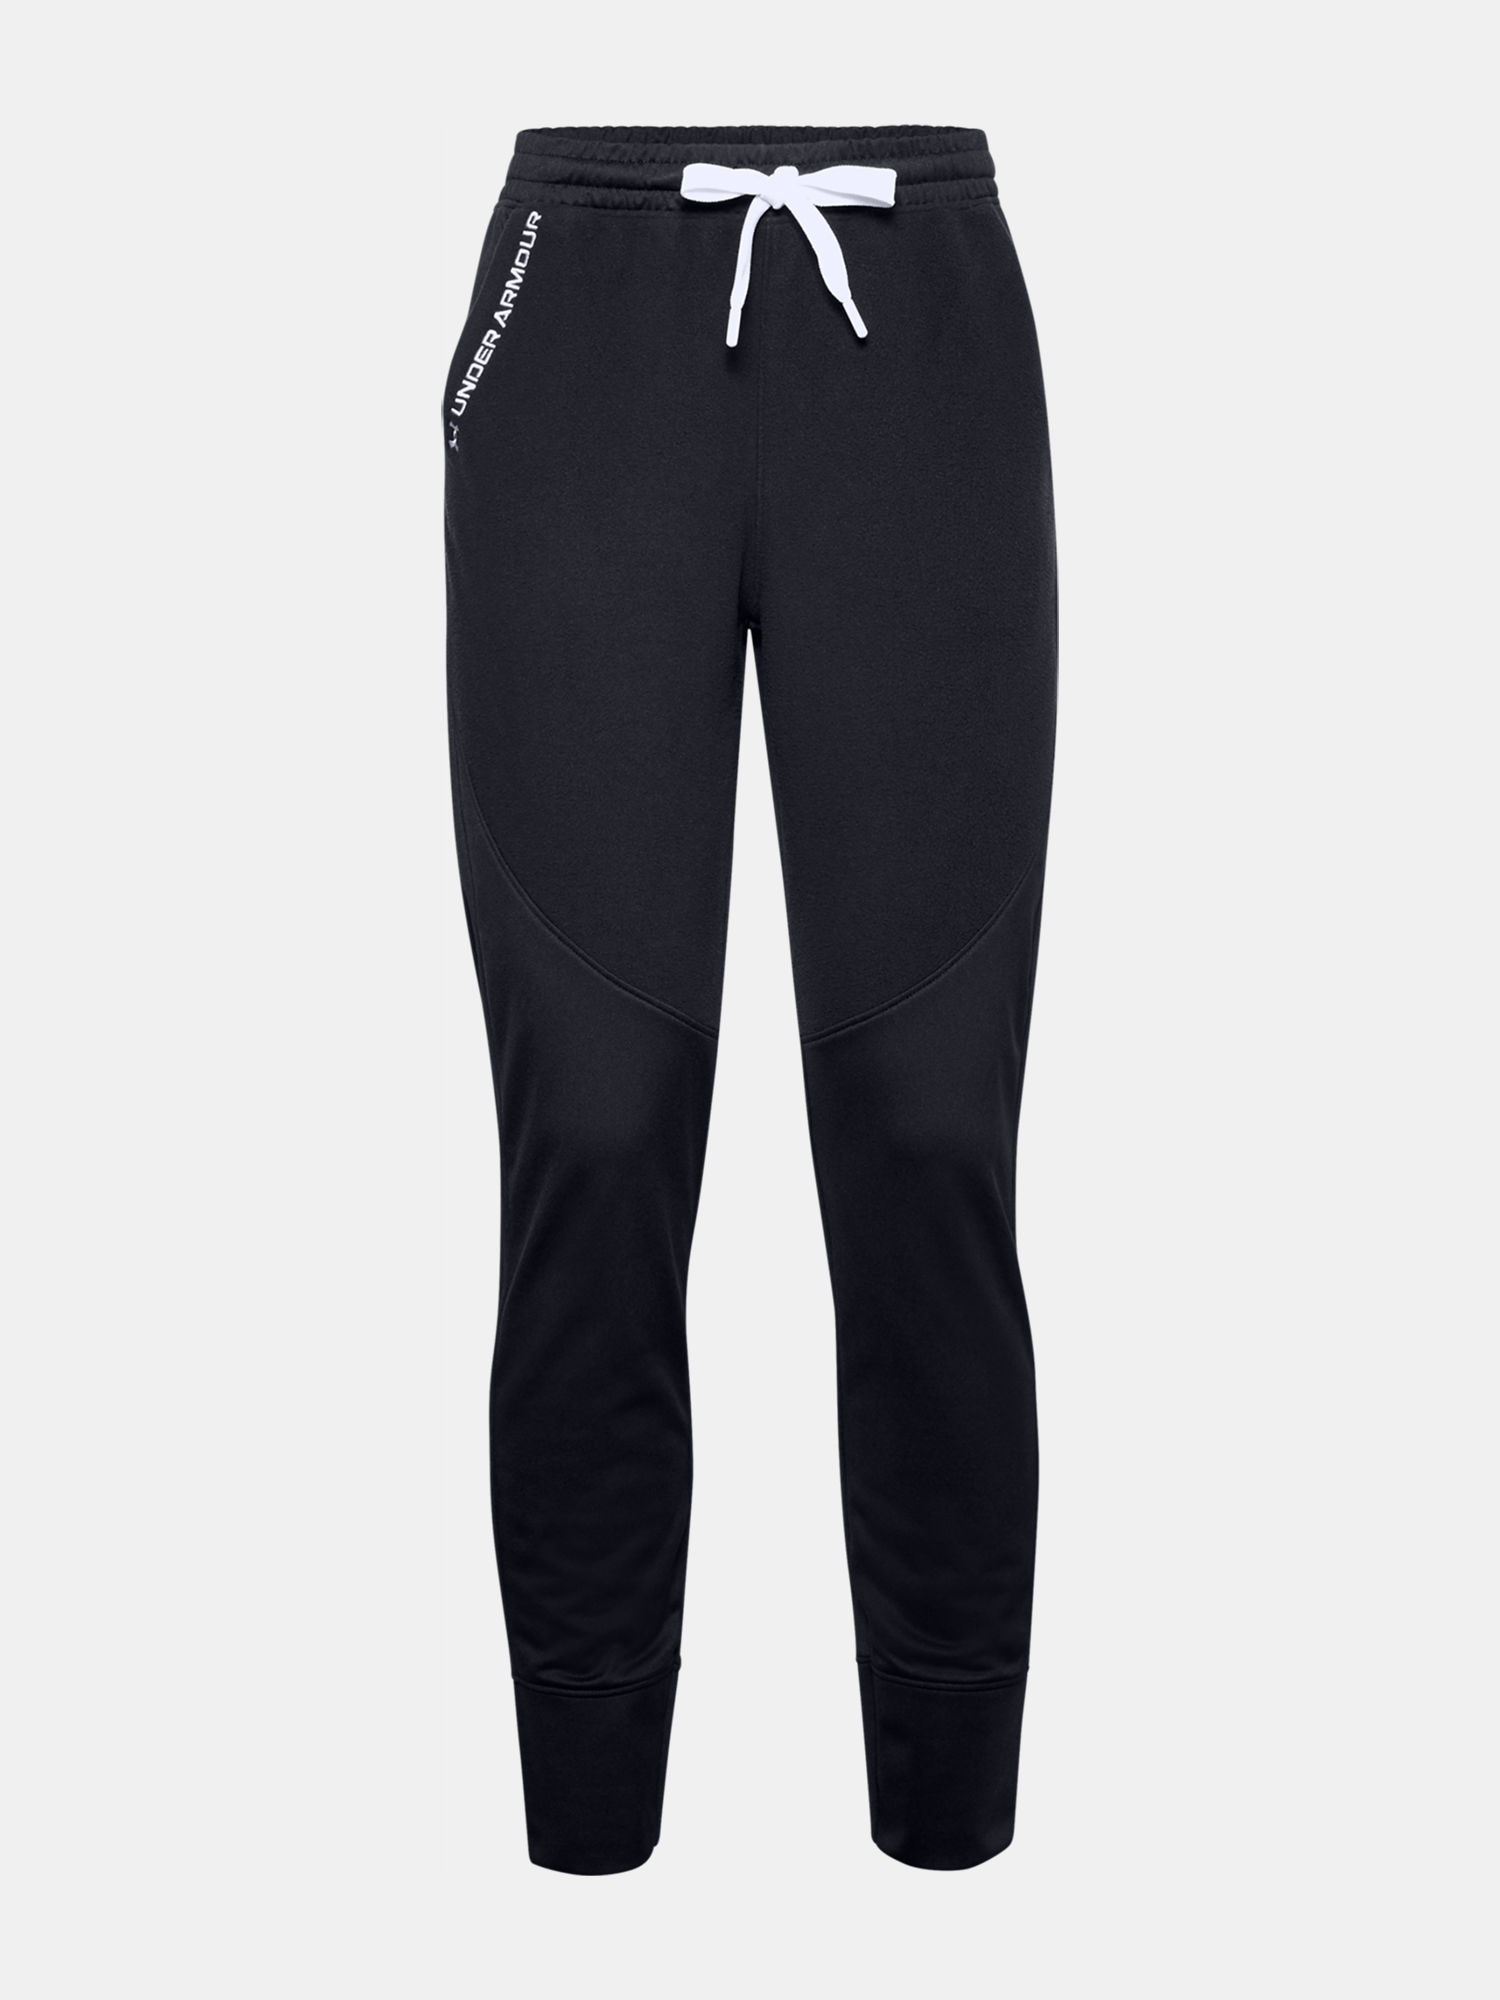 Kalhoty Under Armour Recover Fleece Pants-BLK (3)